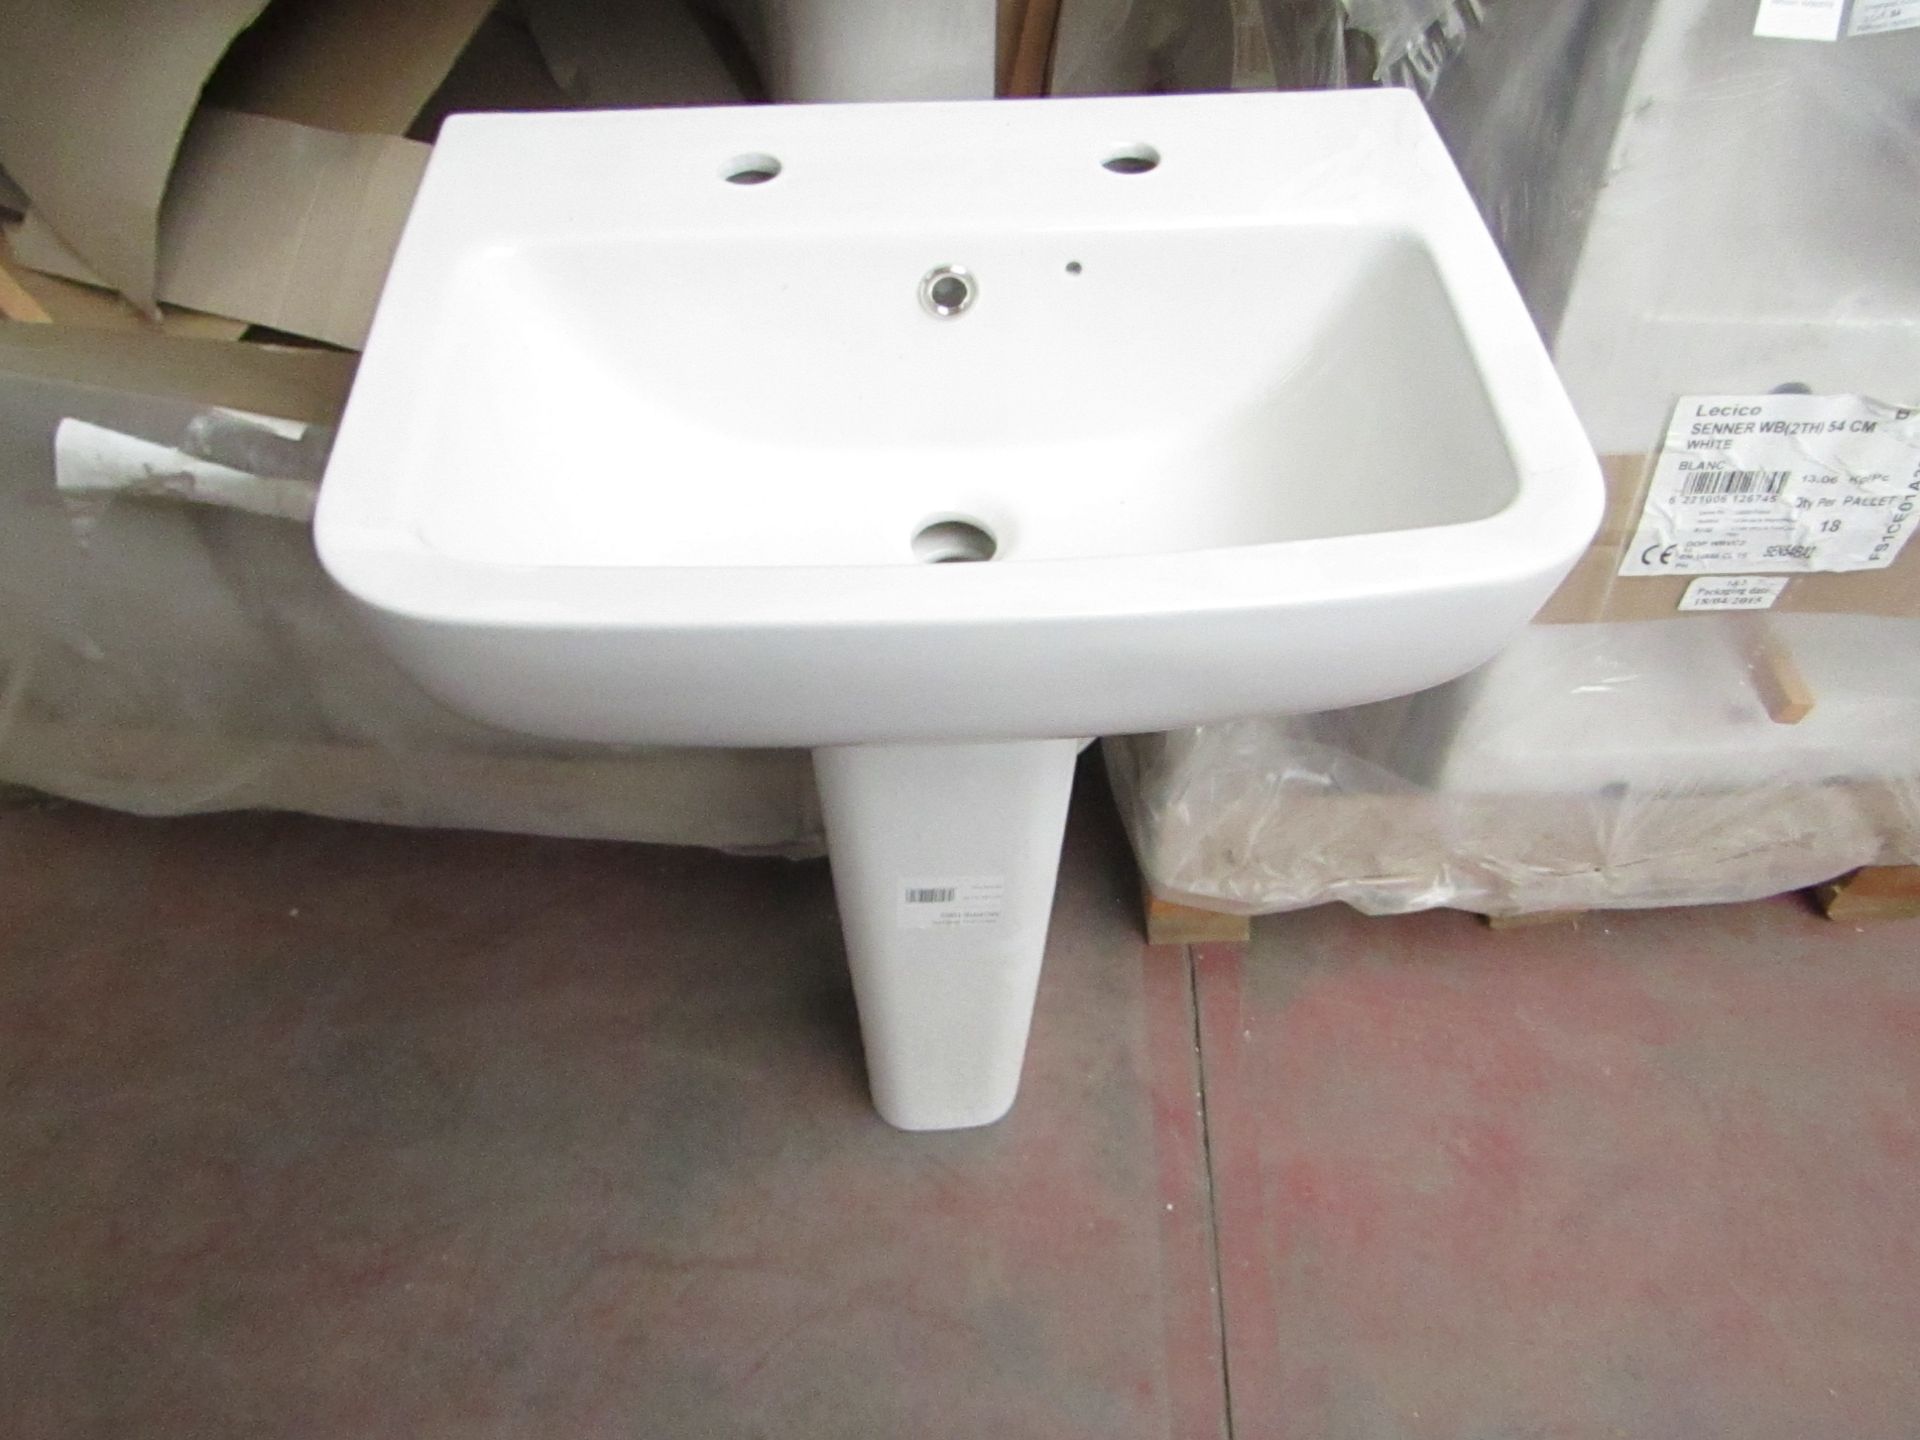 Lecico Senner 2 tap hole basin 60cm with neroli full pedestal that appears to fit the basin, unused